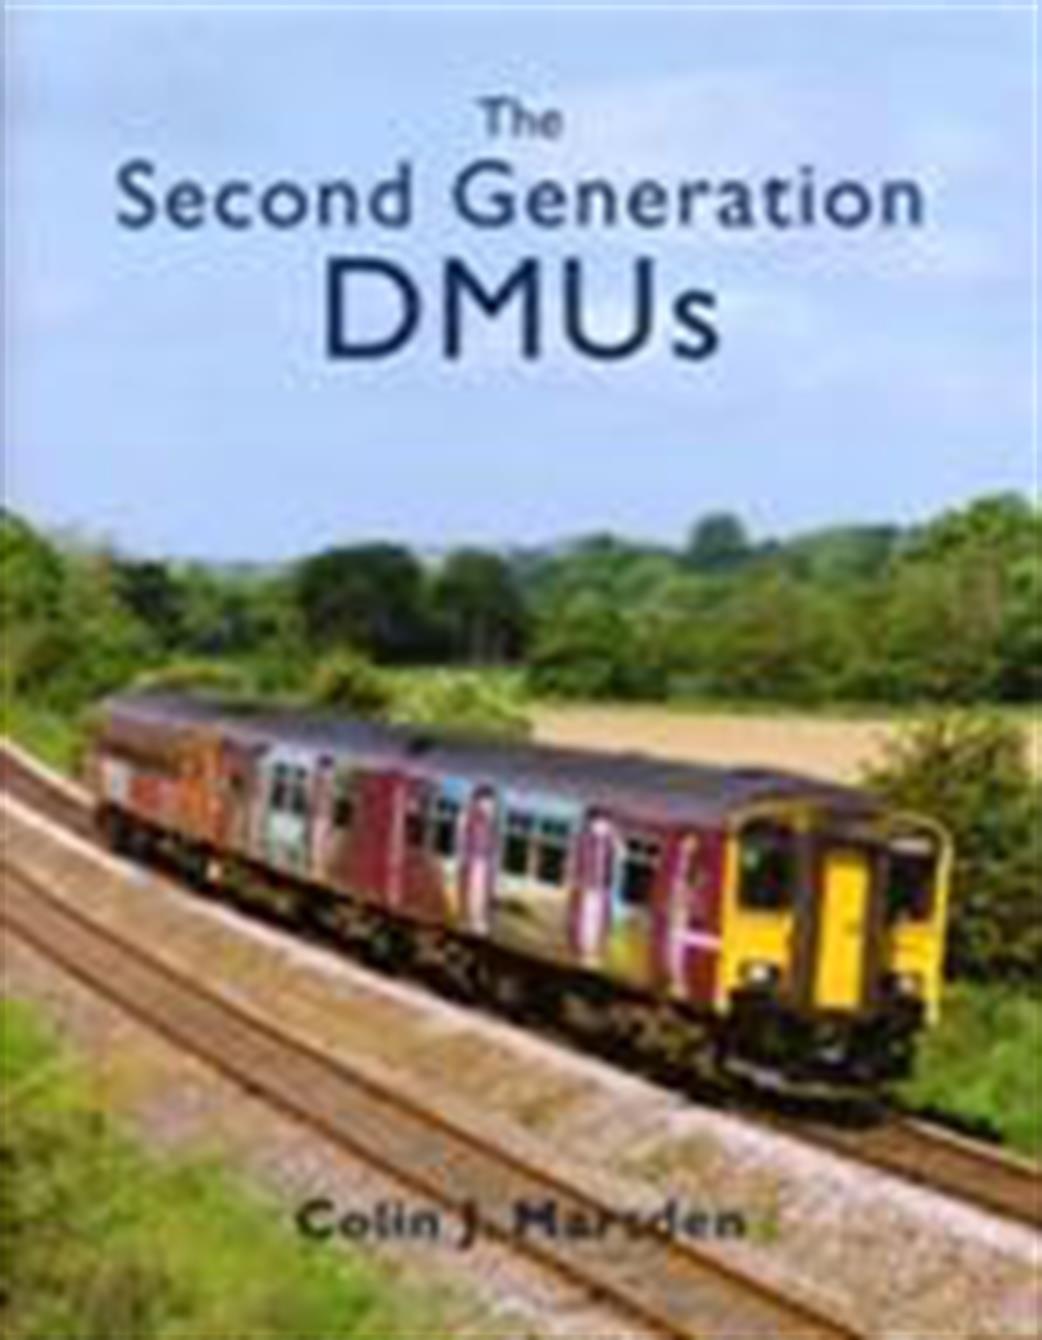 OPC  9780860936244 The Second Generation DMUs by Colin J Marsden